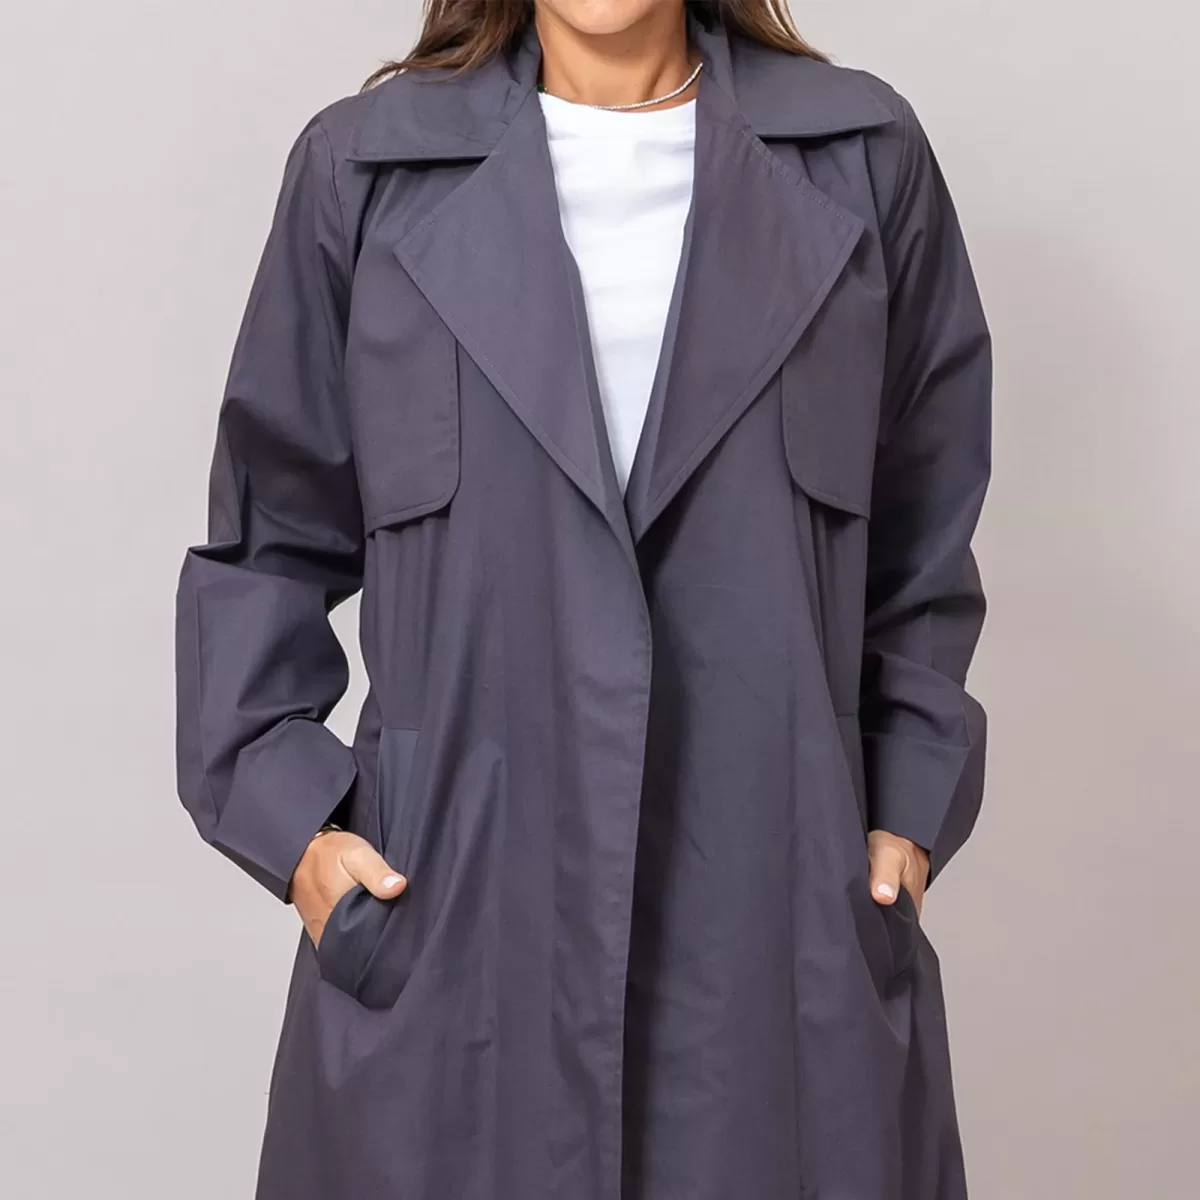 Duster Textured Cotton slate gray Coat with Gilet